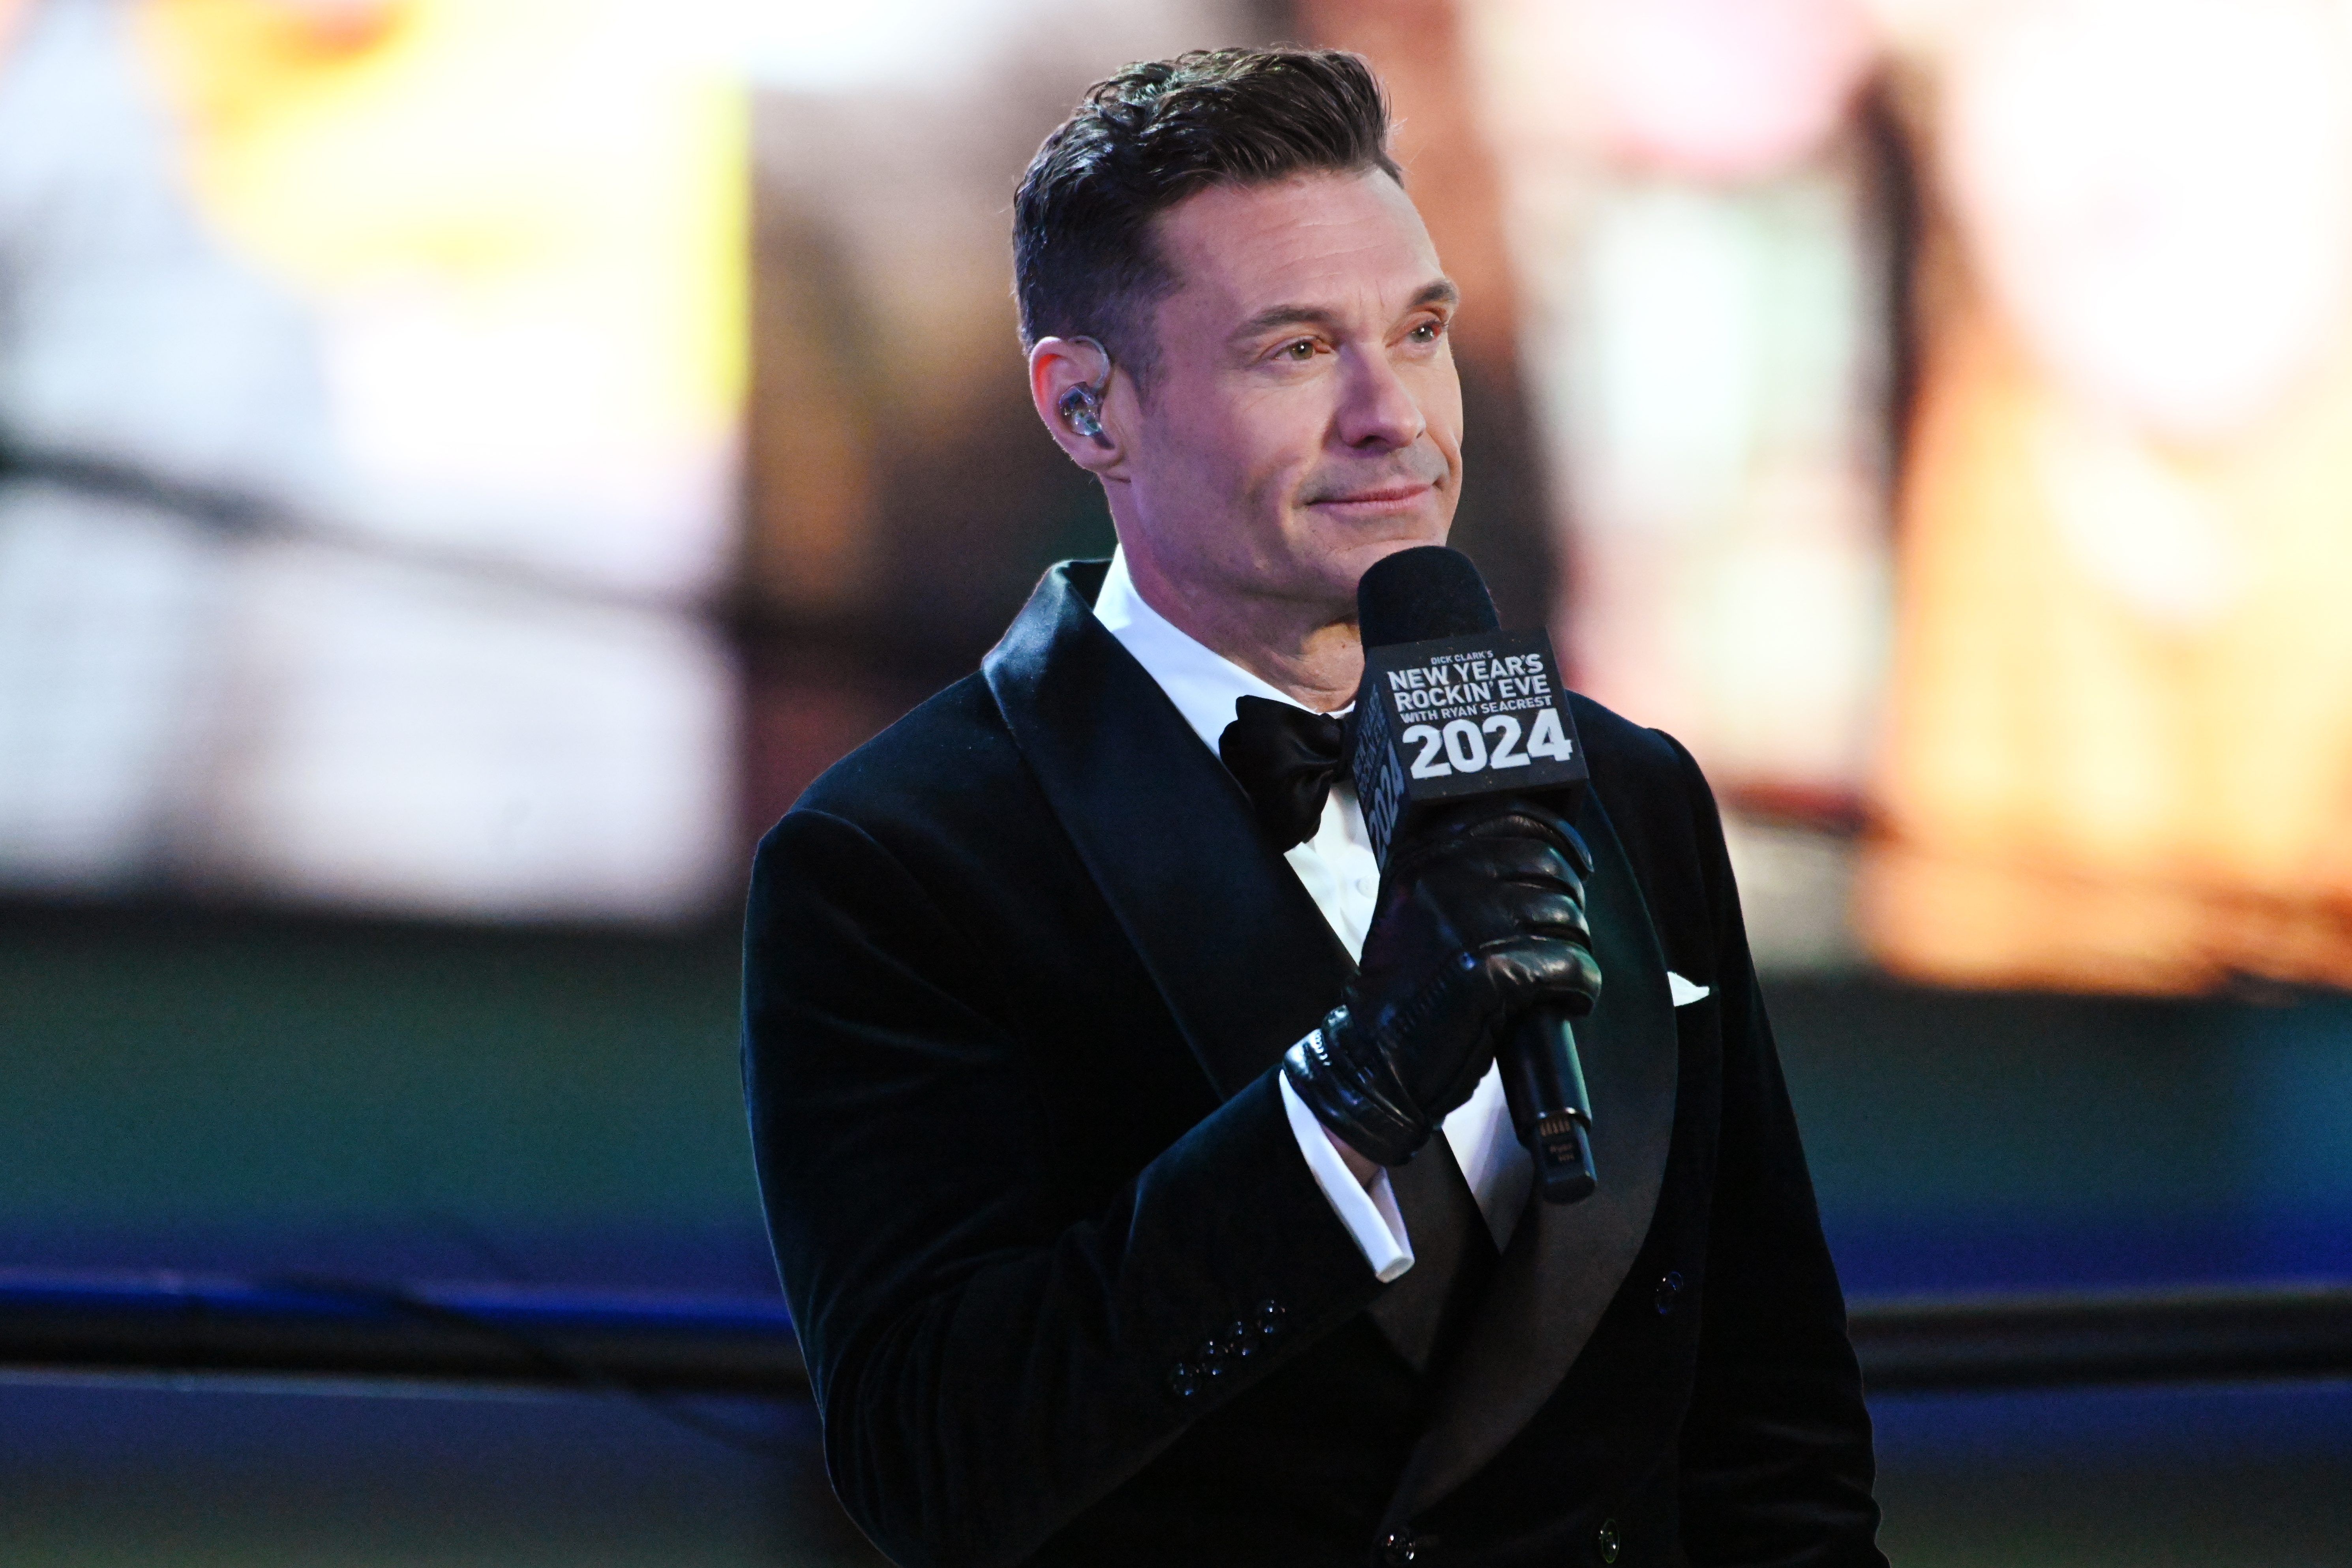 Ryan Seacrest will take over as the new Wheel of Fortune host in Summer 2024